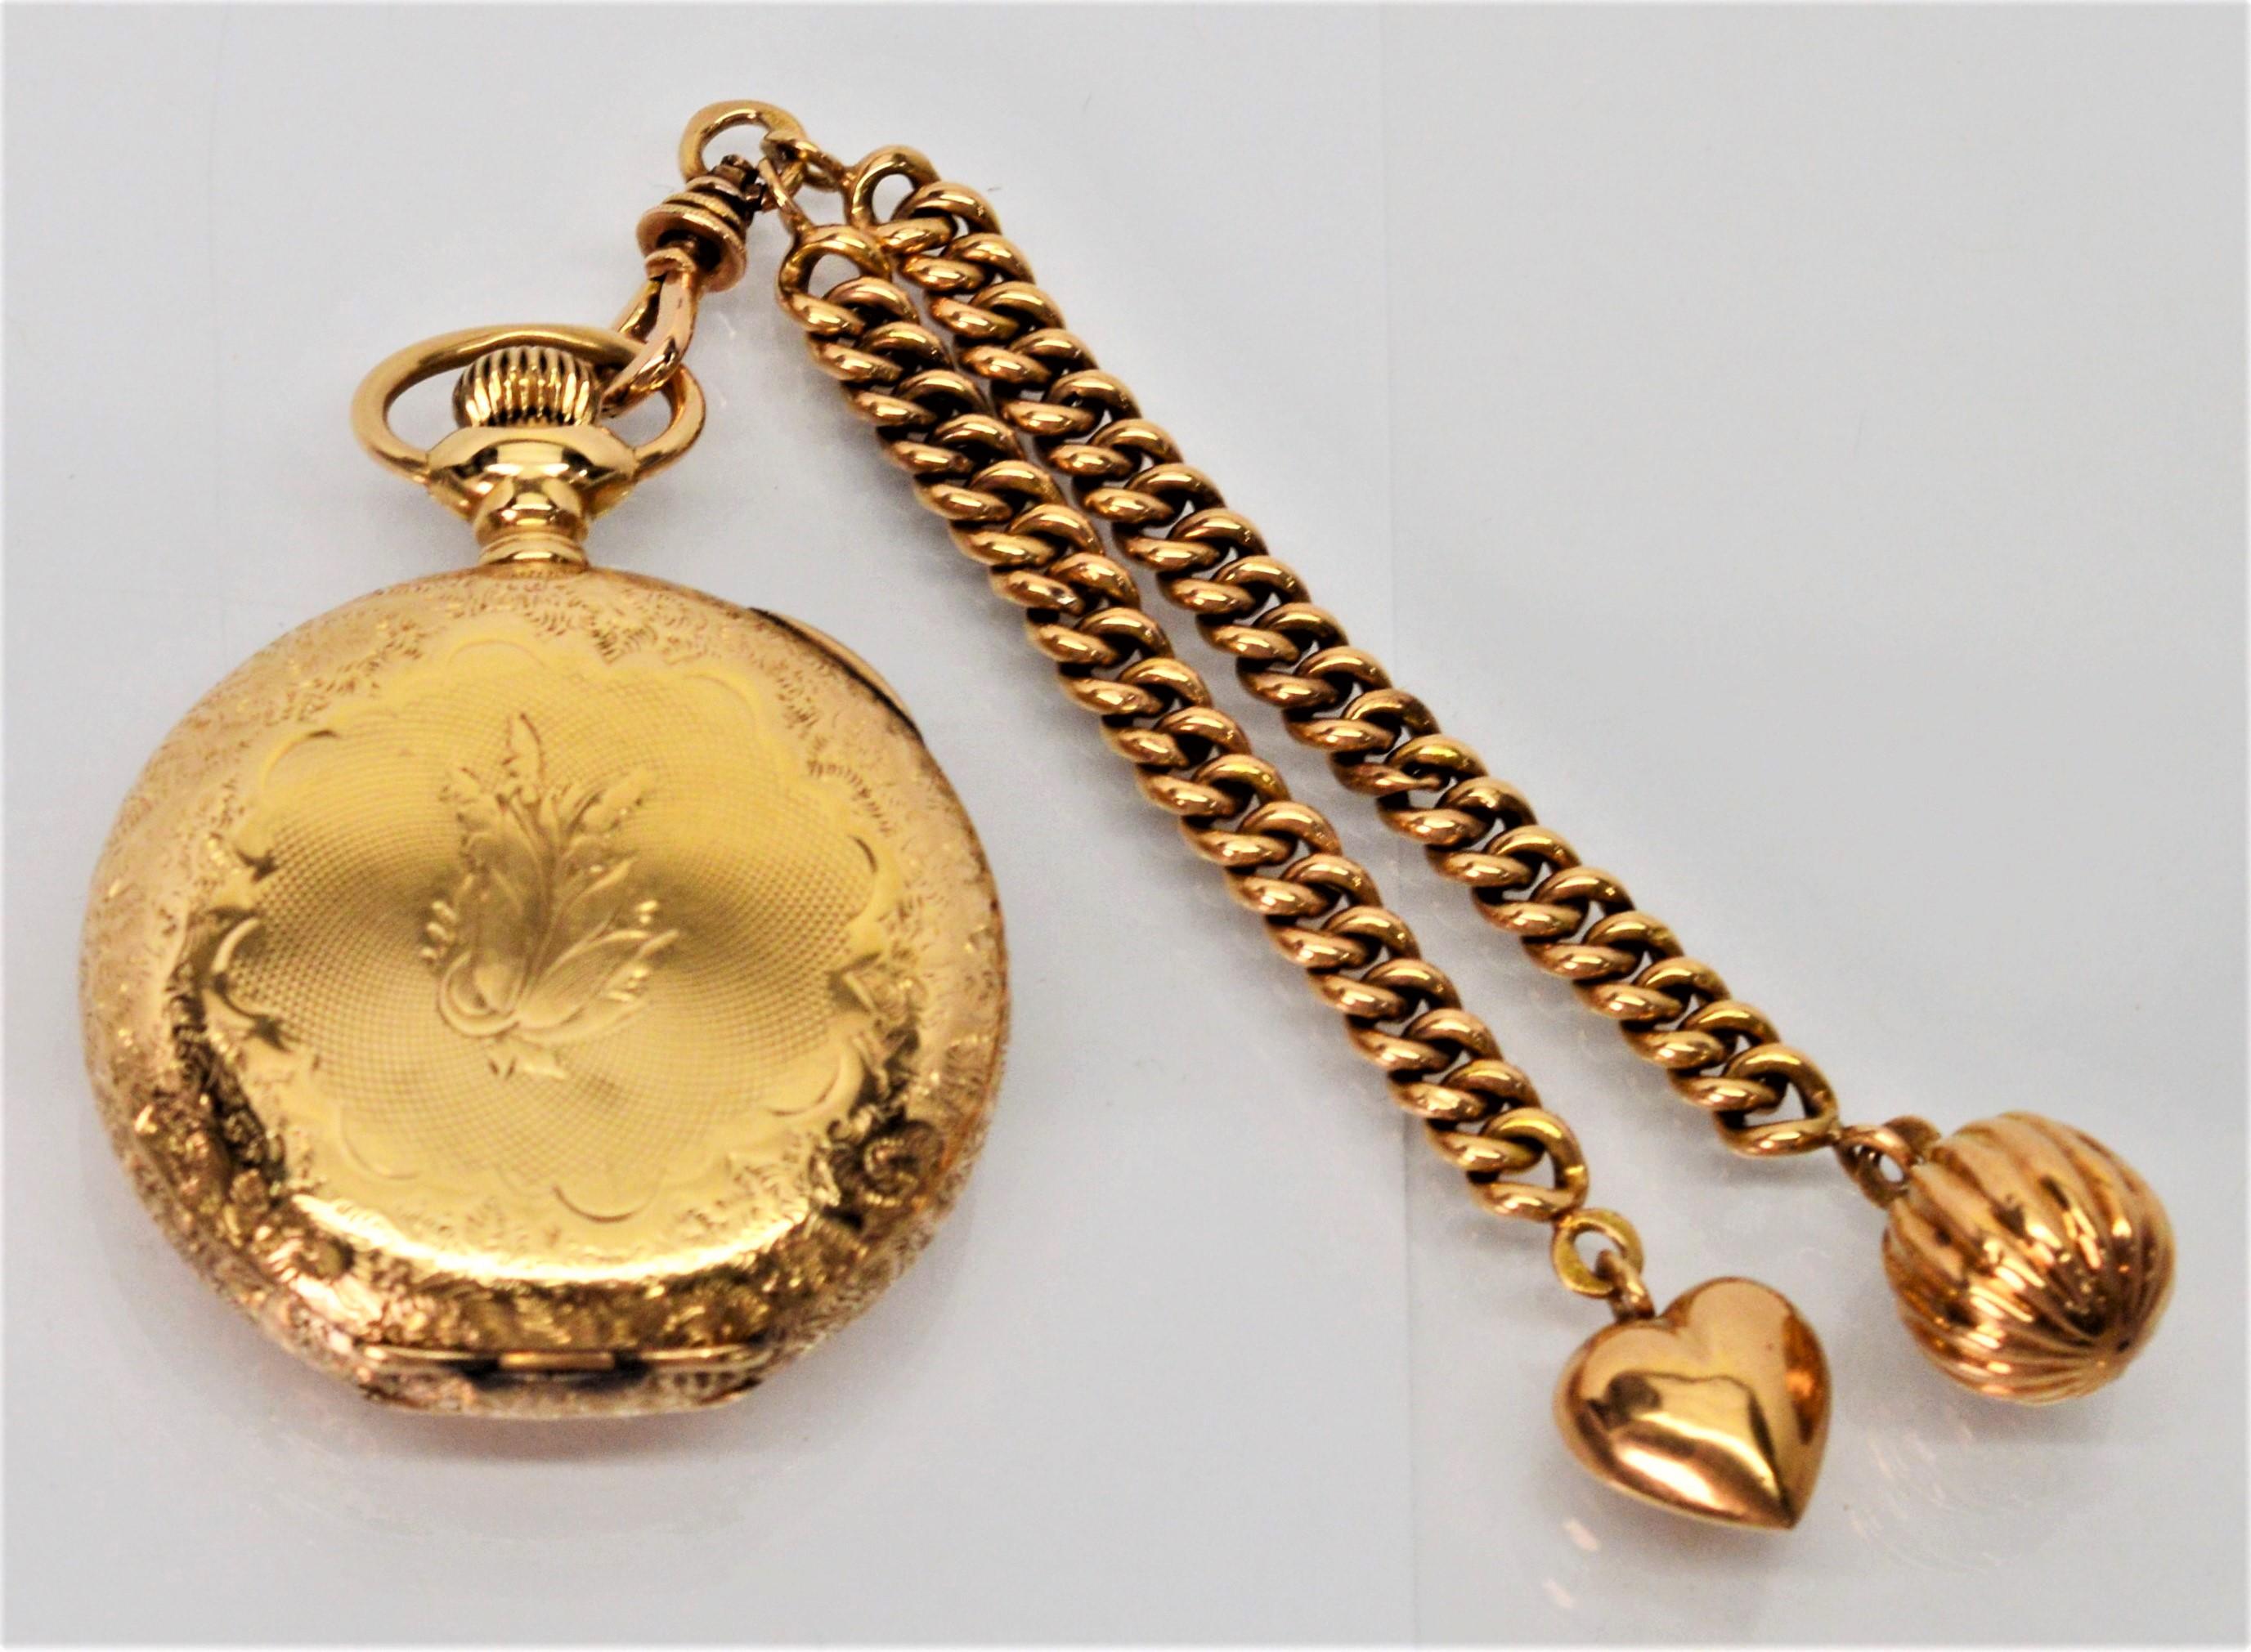 Waltham American Riverside Pocket Watch with Fob and Charms For Sale 7